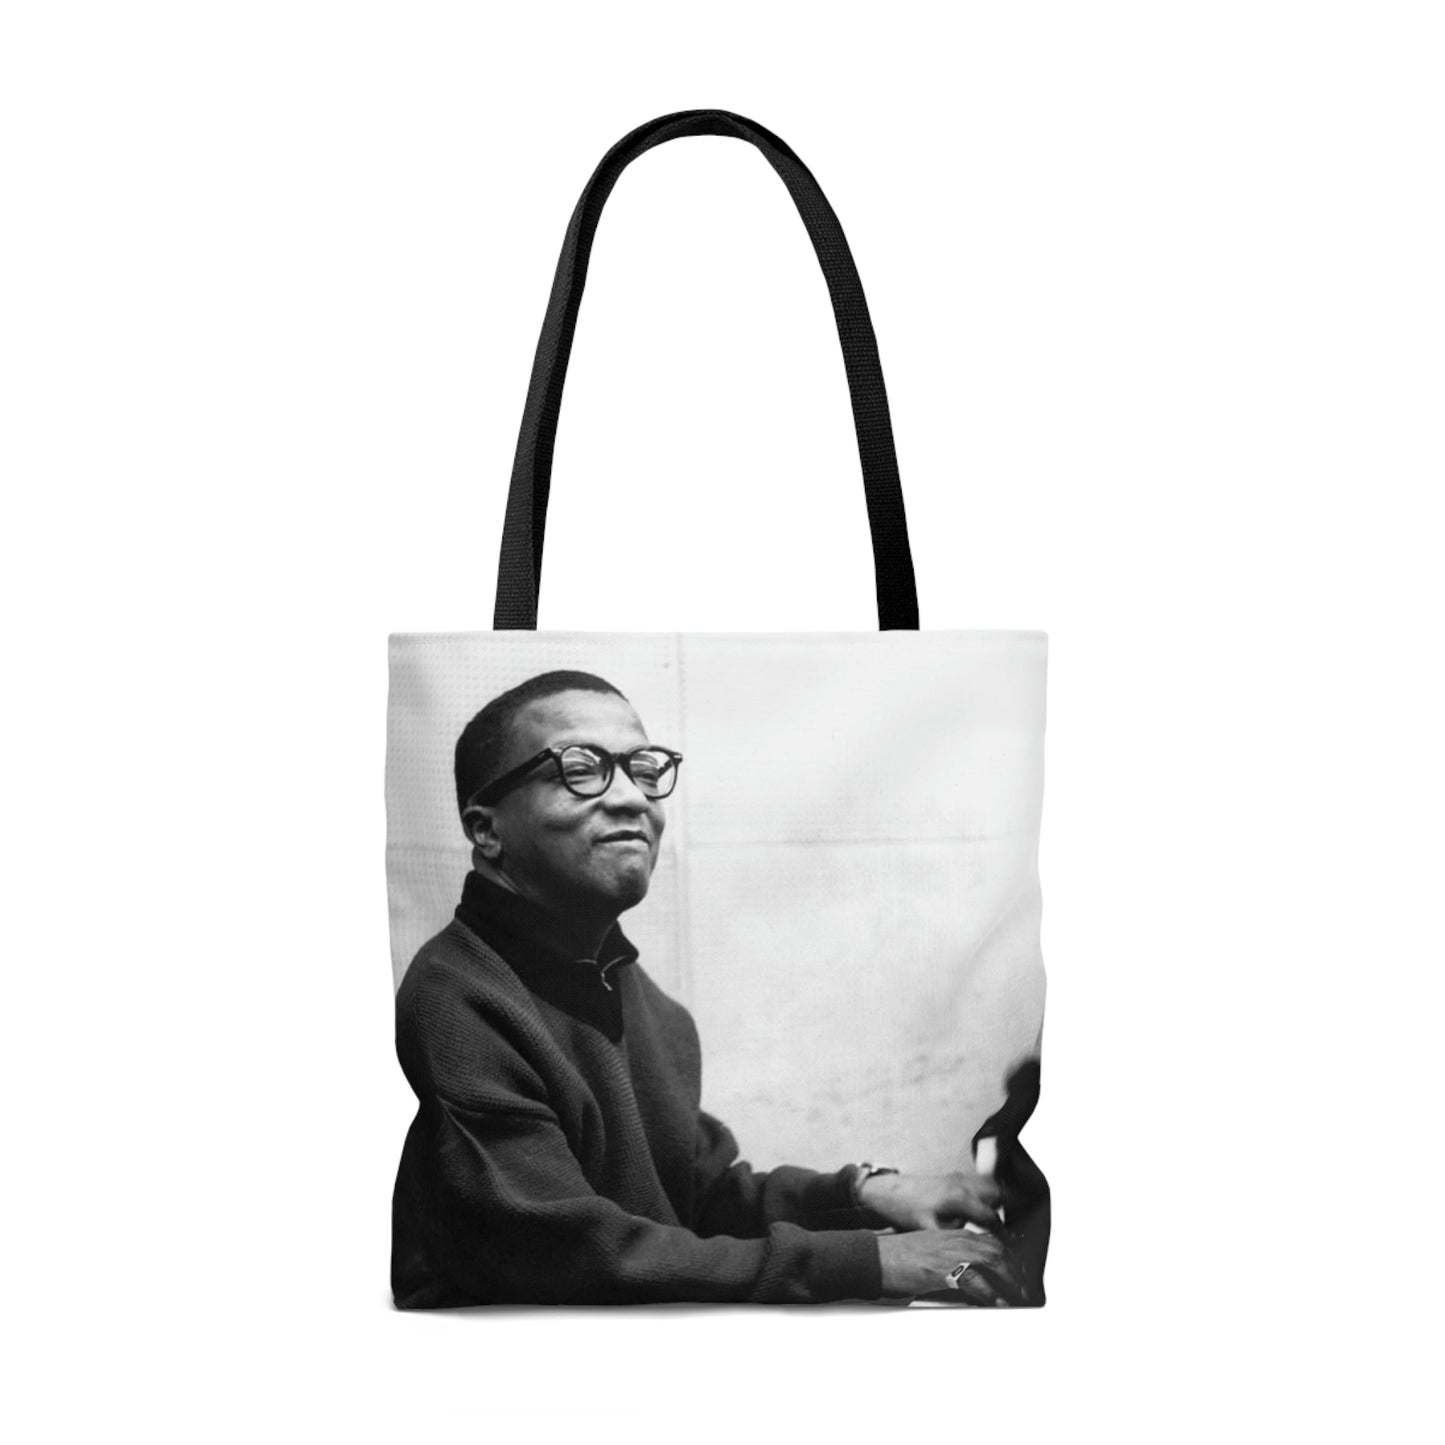 Copy of The "Red Sweater" Tote Bag